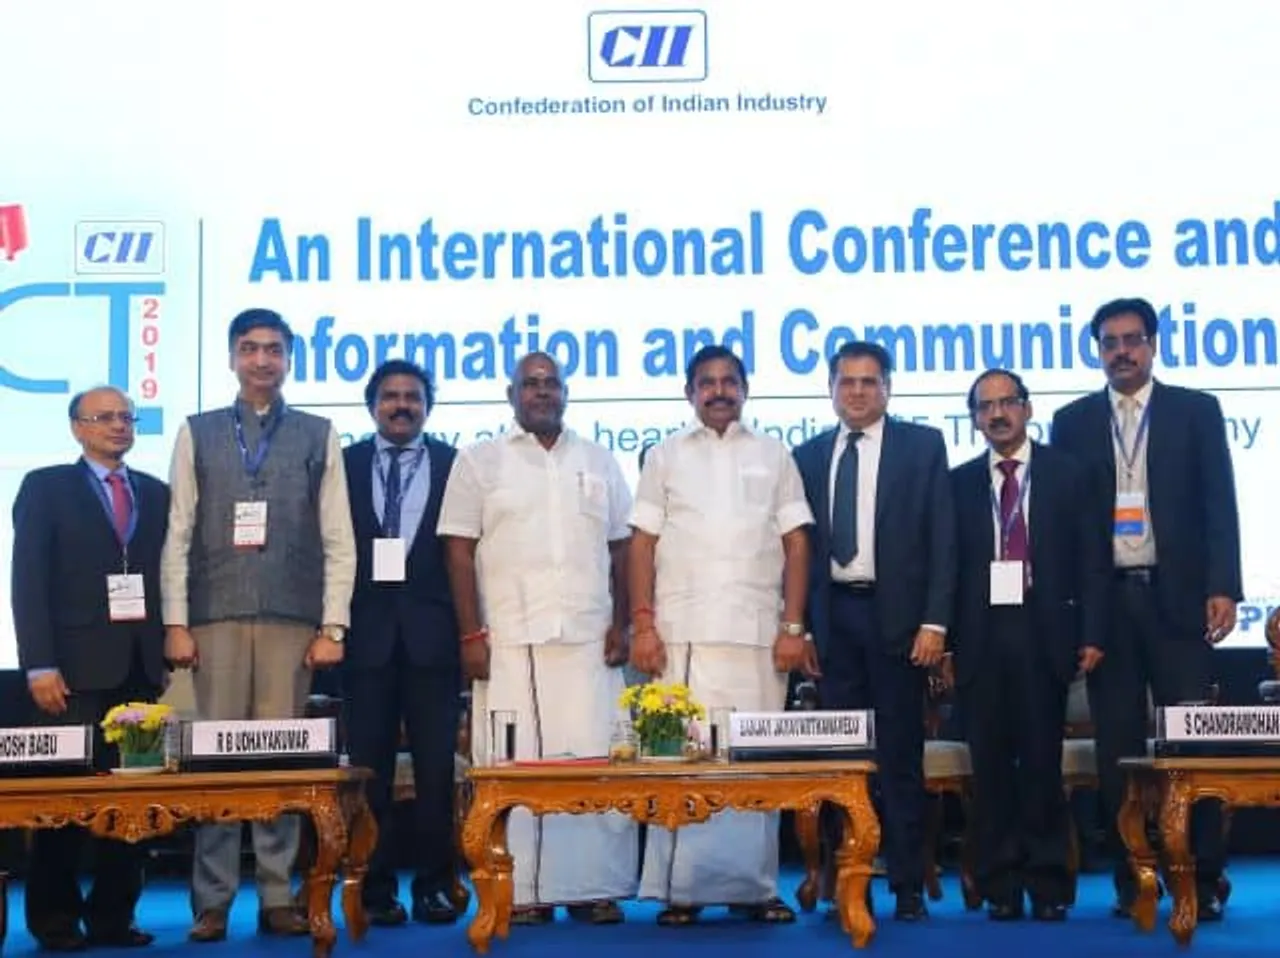 CII CONNECT 2019 reflects Tamil Nadu’s prowess in digital technology and investment boost in ICT